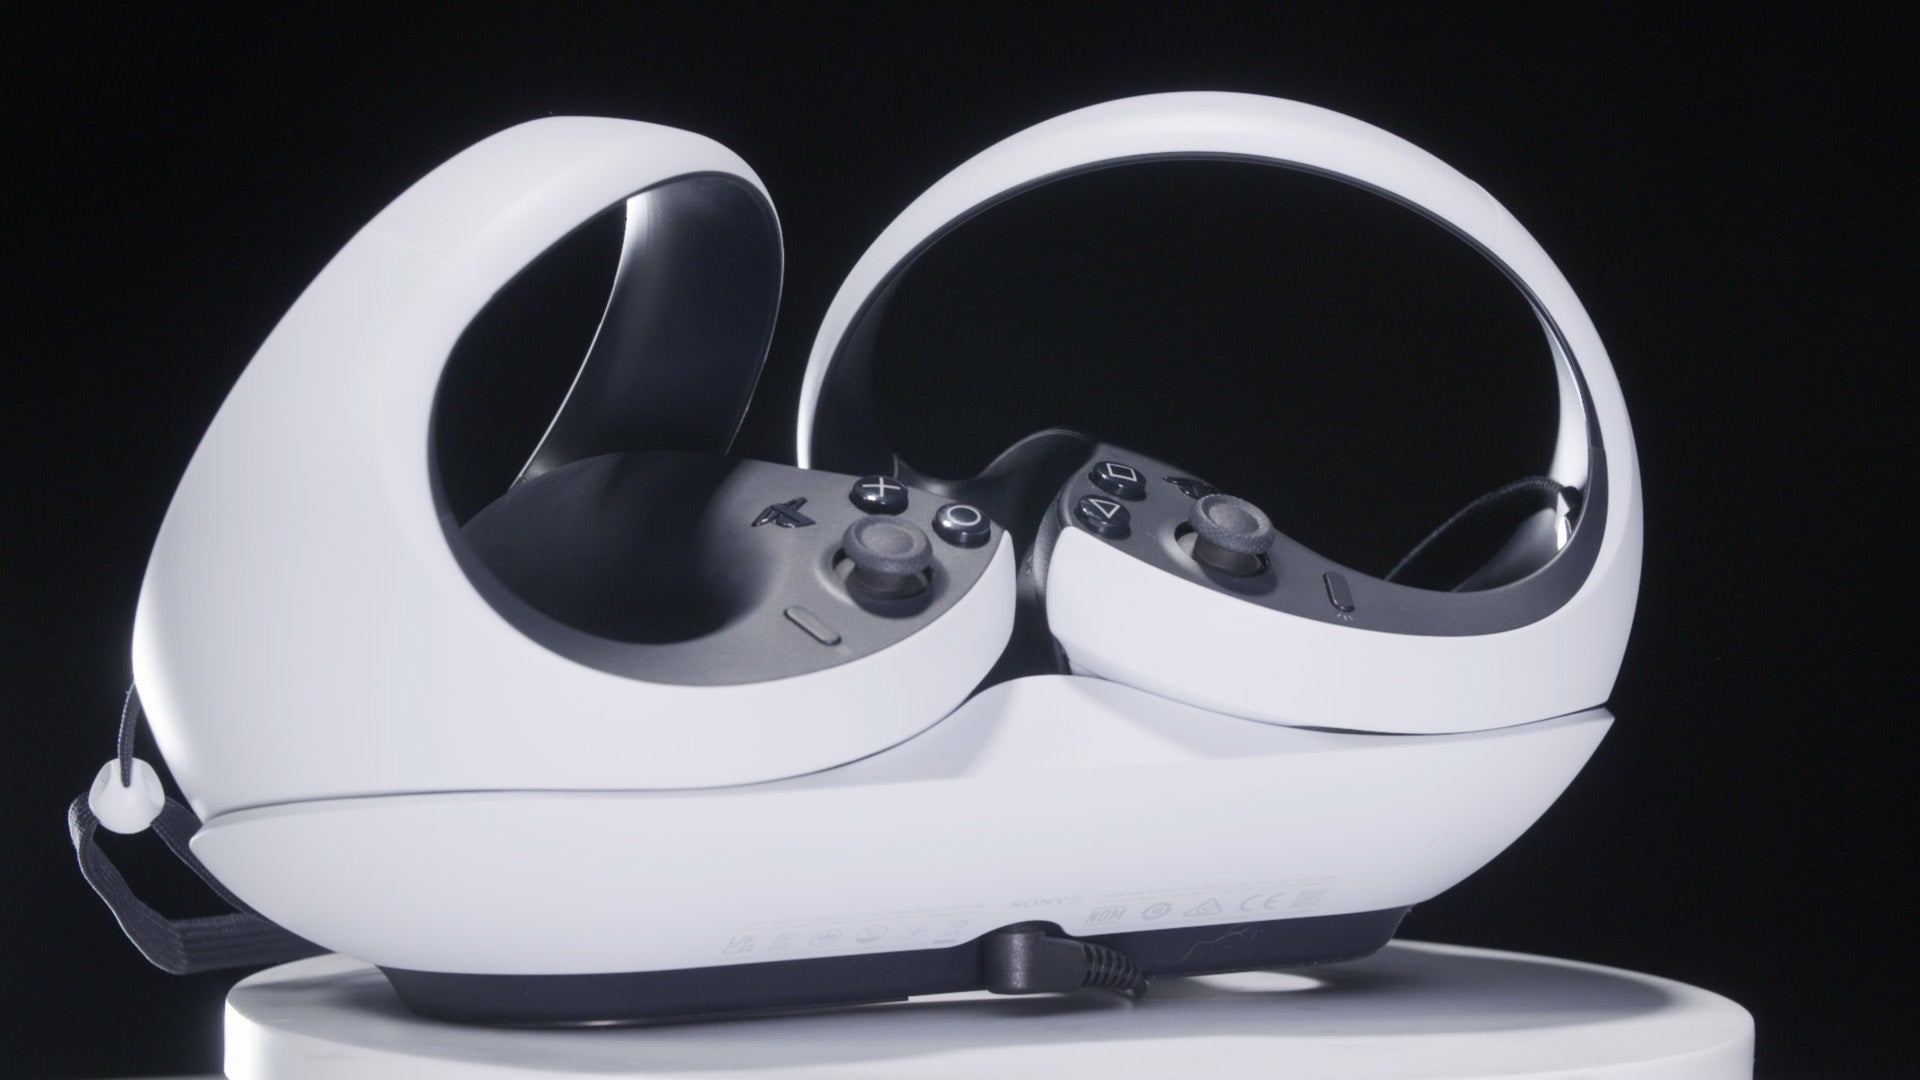 The charging cradle (sold separately) is a must-buy for PS VR2. (Photo: Kotaku)